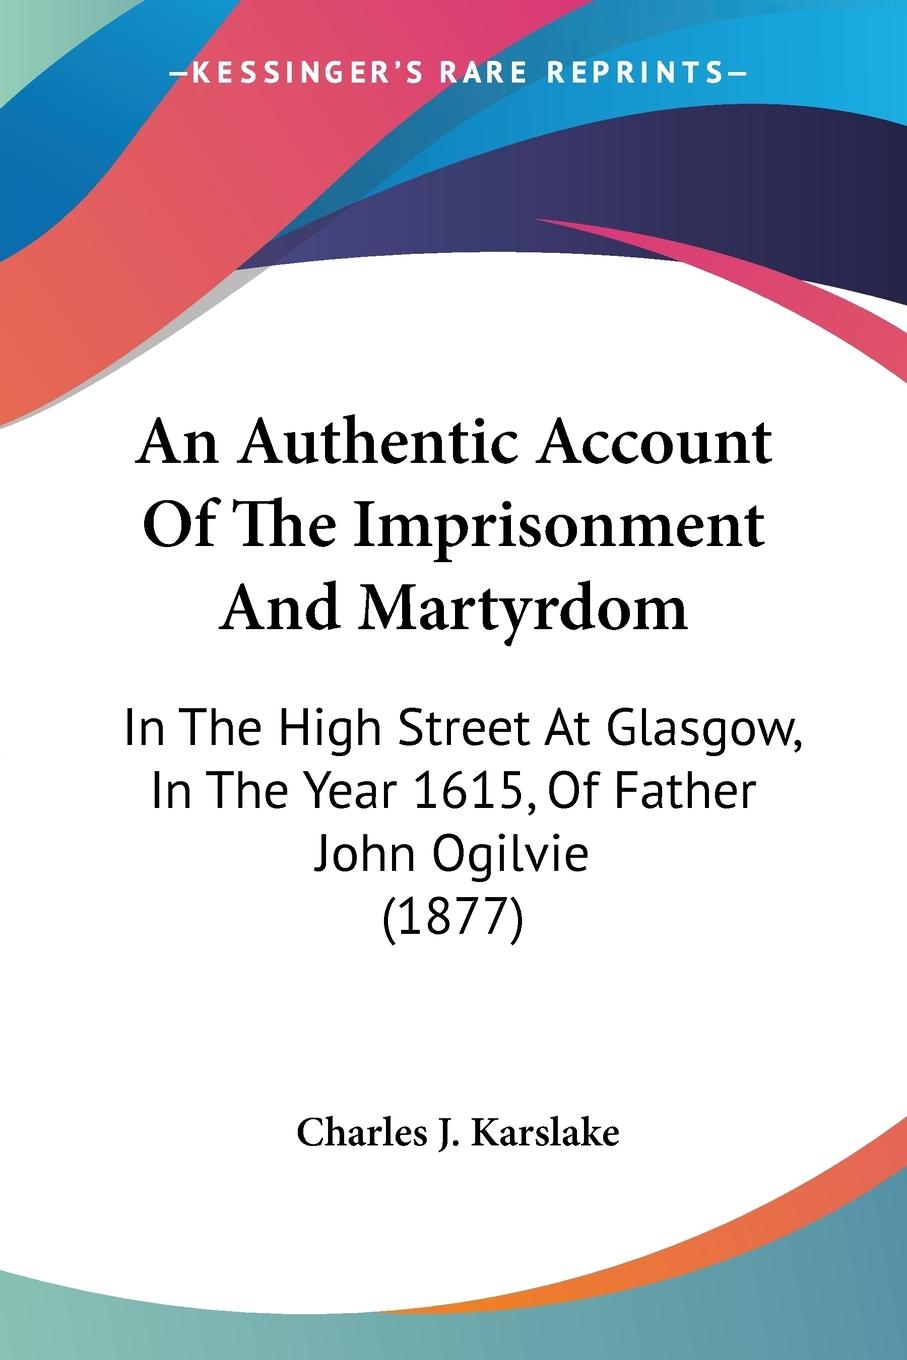 An Authentic Account Of The Imprisonment And Martyrdom - Karslake, Charles J.